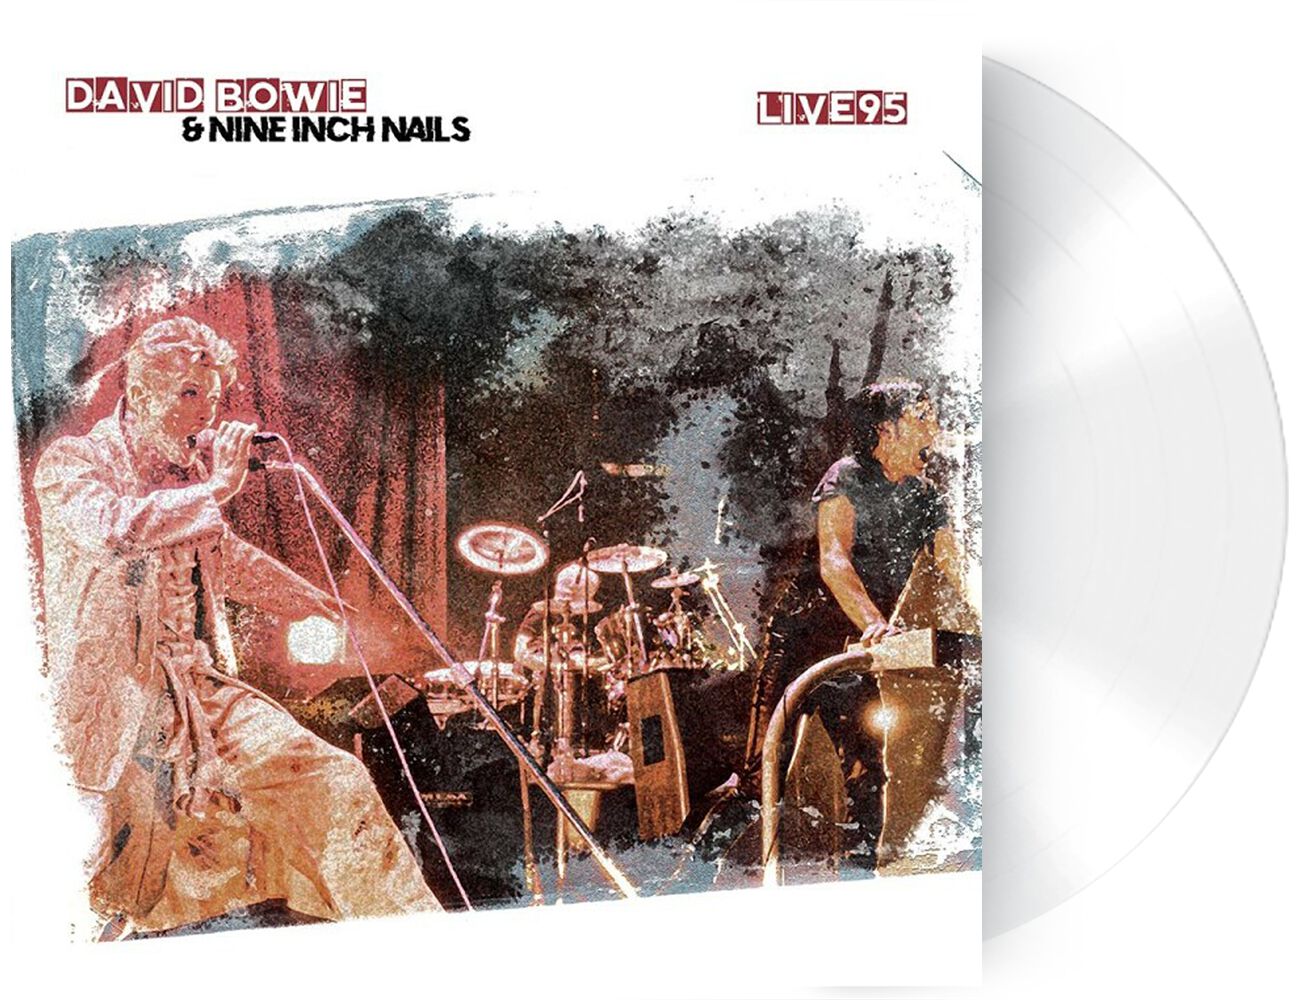 David Bowie With Nine Inch Nails Live In '95 LP white